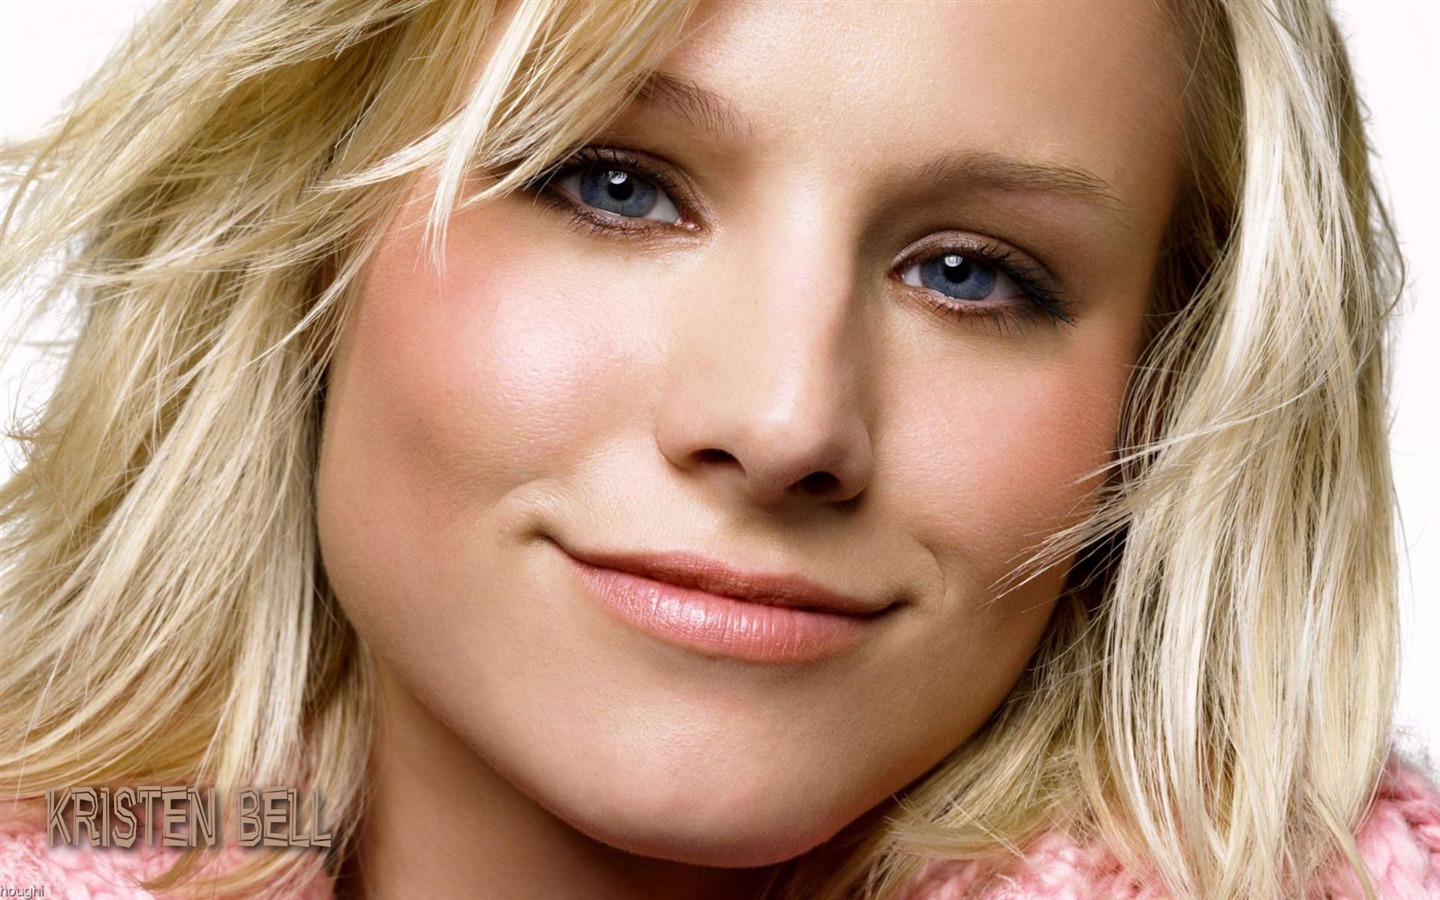 Kristen Bell #072 - 1440x900 Wallpapers Pictures Photos Images